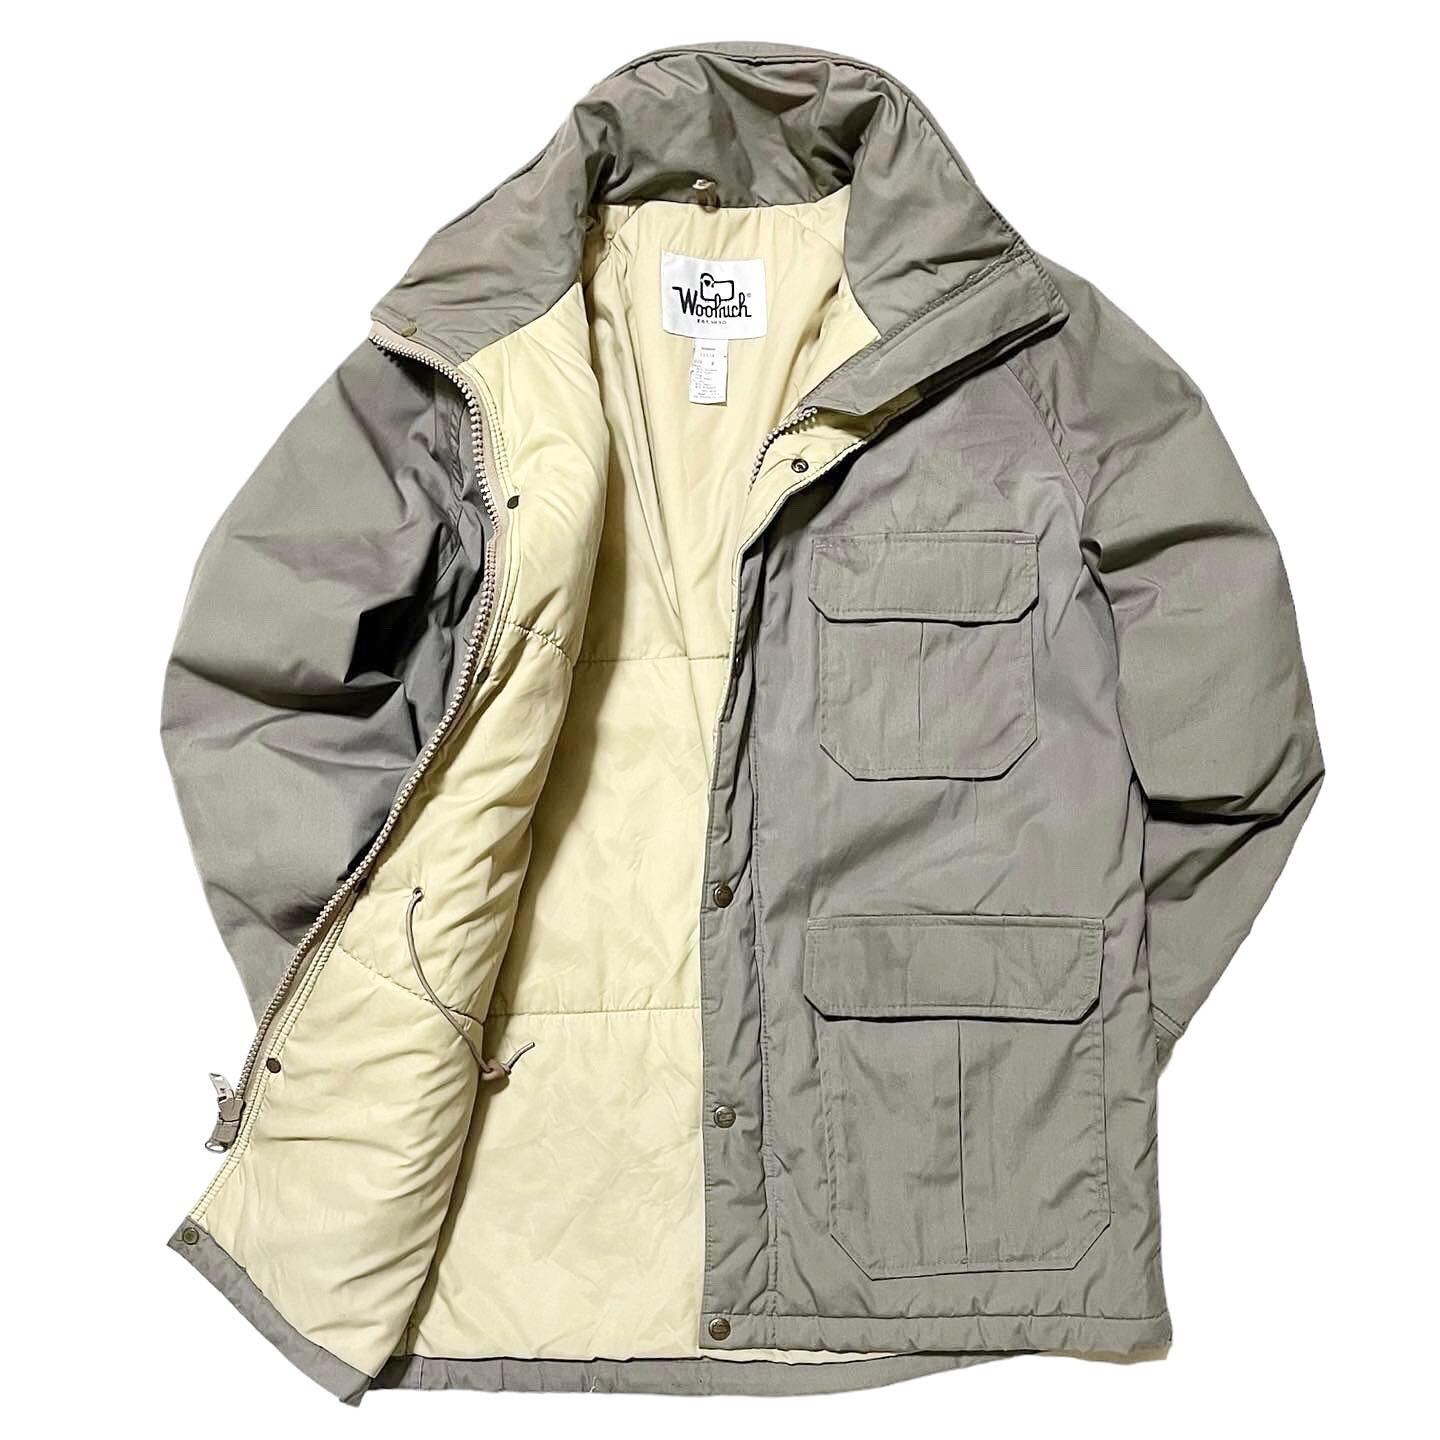 Woolrich】1970's ウールリッチ マウンテンパーカー フード付 MADE IN